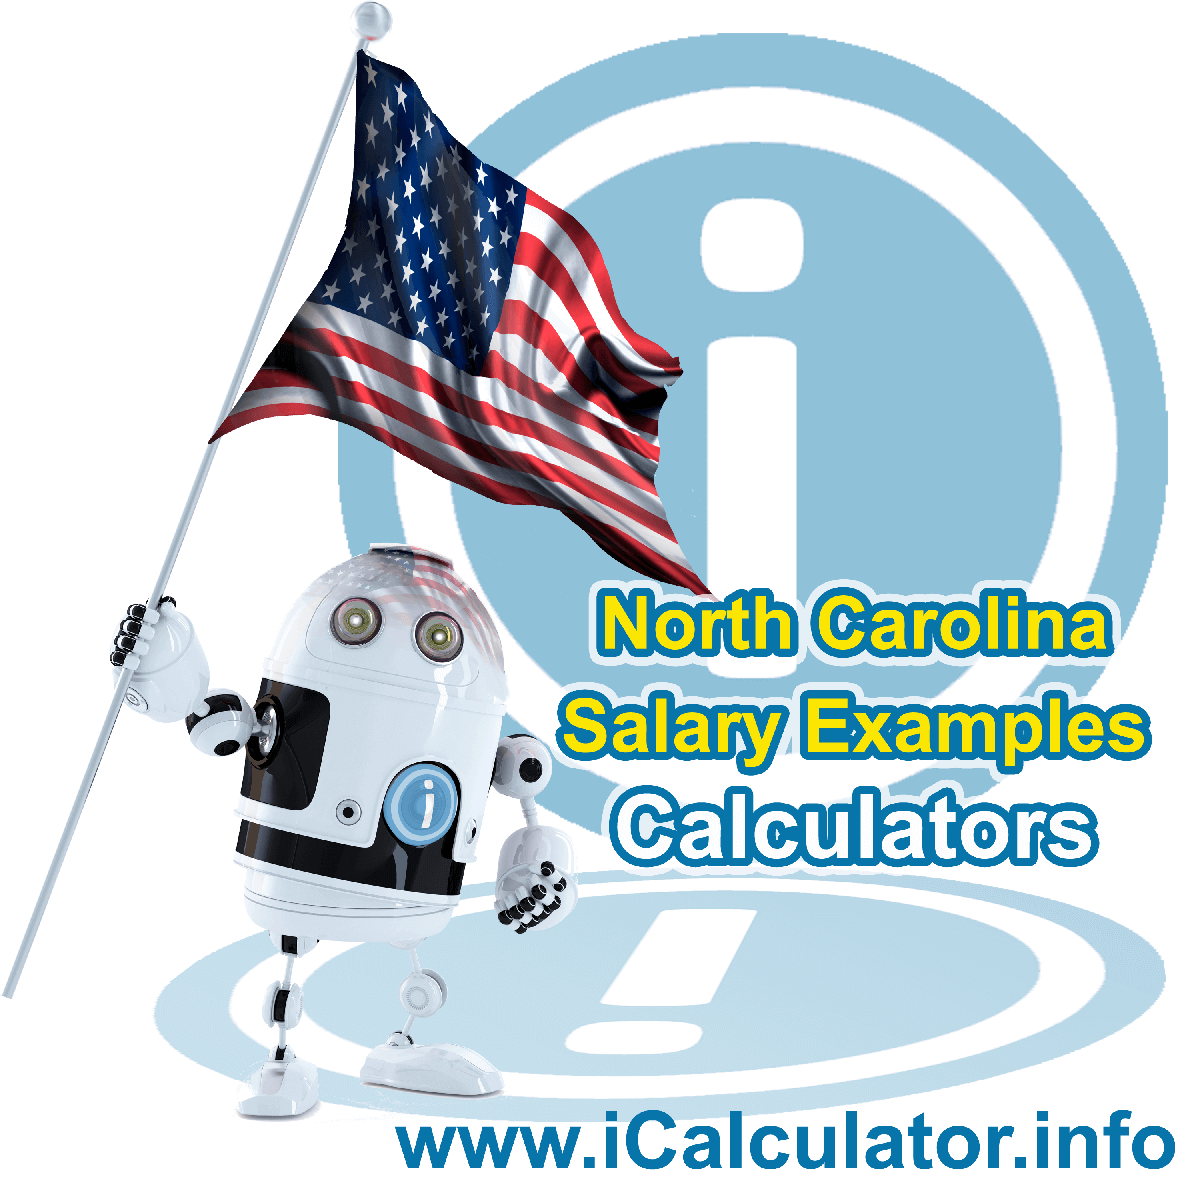 North Carolina Salary Example for $ 175,000.00 in 2023 | iCalculator™ | $ 175,000.00 salary example for employee and employer paying North Carolina State tincome taxes. Detailed salary after tax calculation including North Carolina State Tax, Federal State Tax, Medicare Deductions, Social Security, Capital Gains and other income tax and salary deductions complete with supporting North Carolina state tax tables 